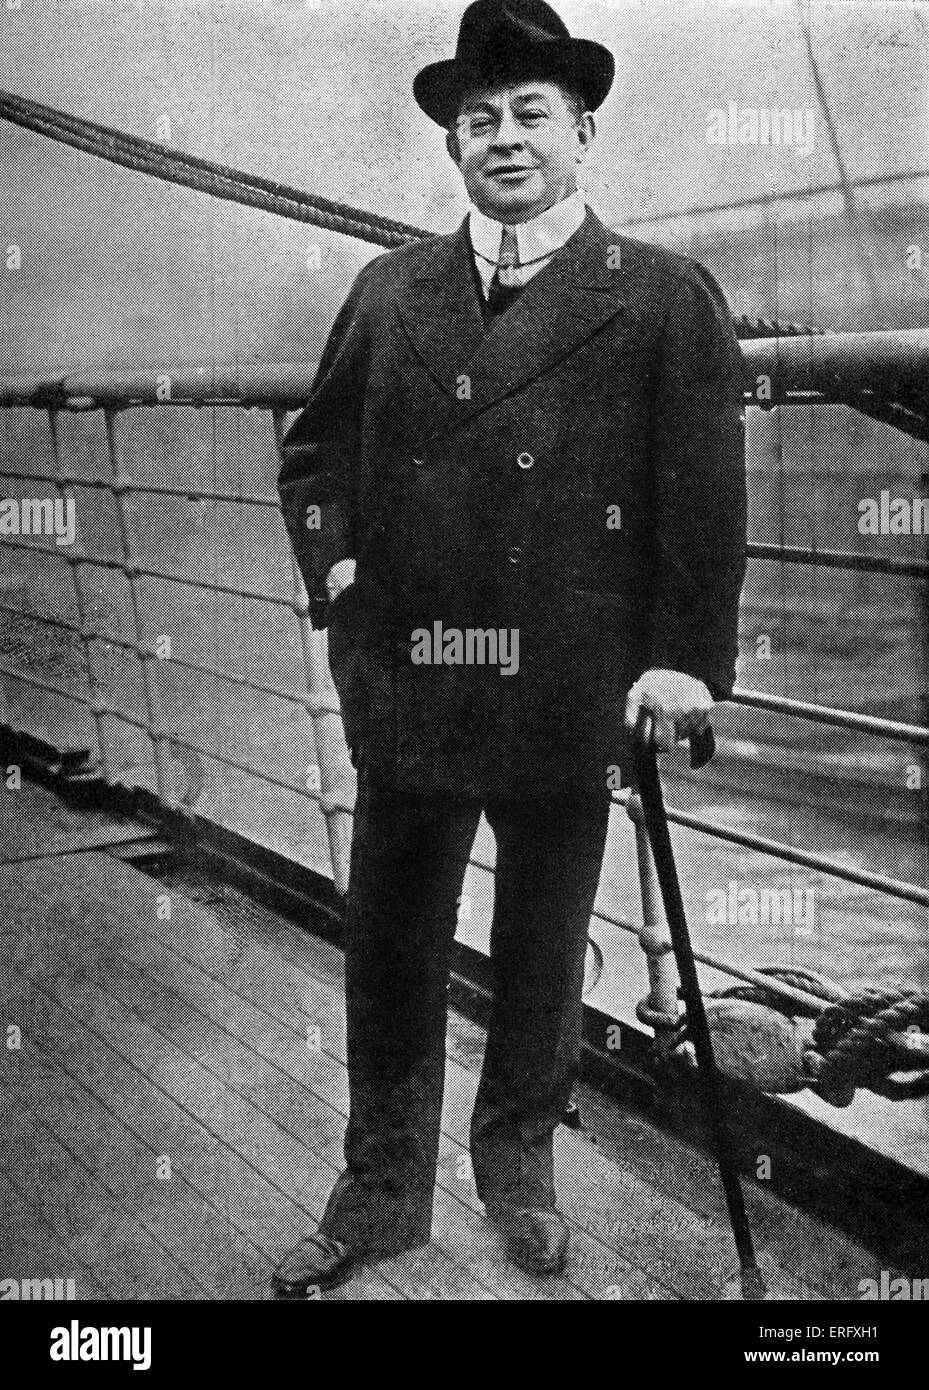 Charles Frohman, last photograph before he died in the sinking of the RMS Lusitania, a British luxury ocean liner. The Lusitania was torpedoed by German submarine U-20 on 7 May 1915. CF: American theatrical producer, 15 July 1856 – 7 May 1915. Stock Photo